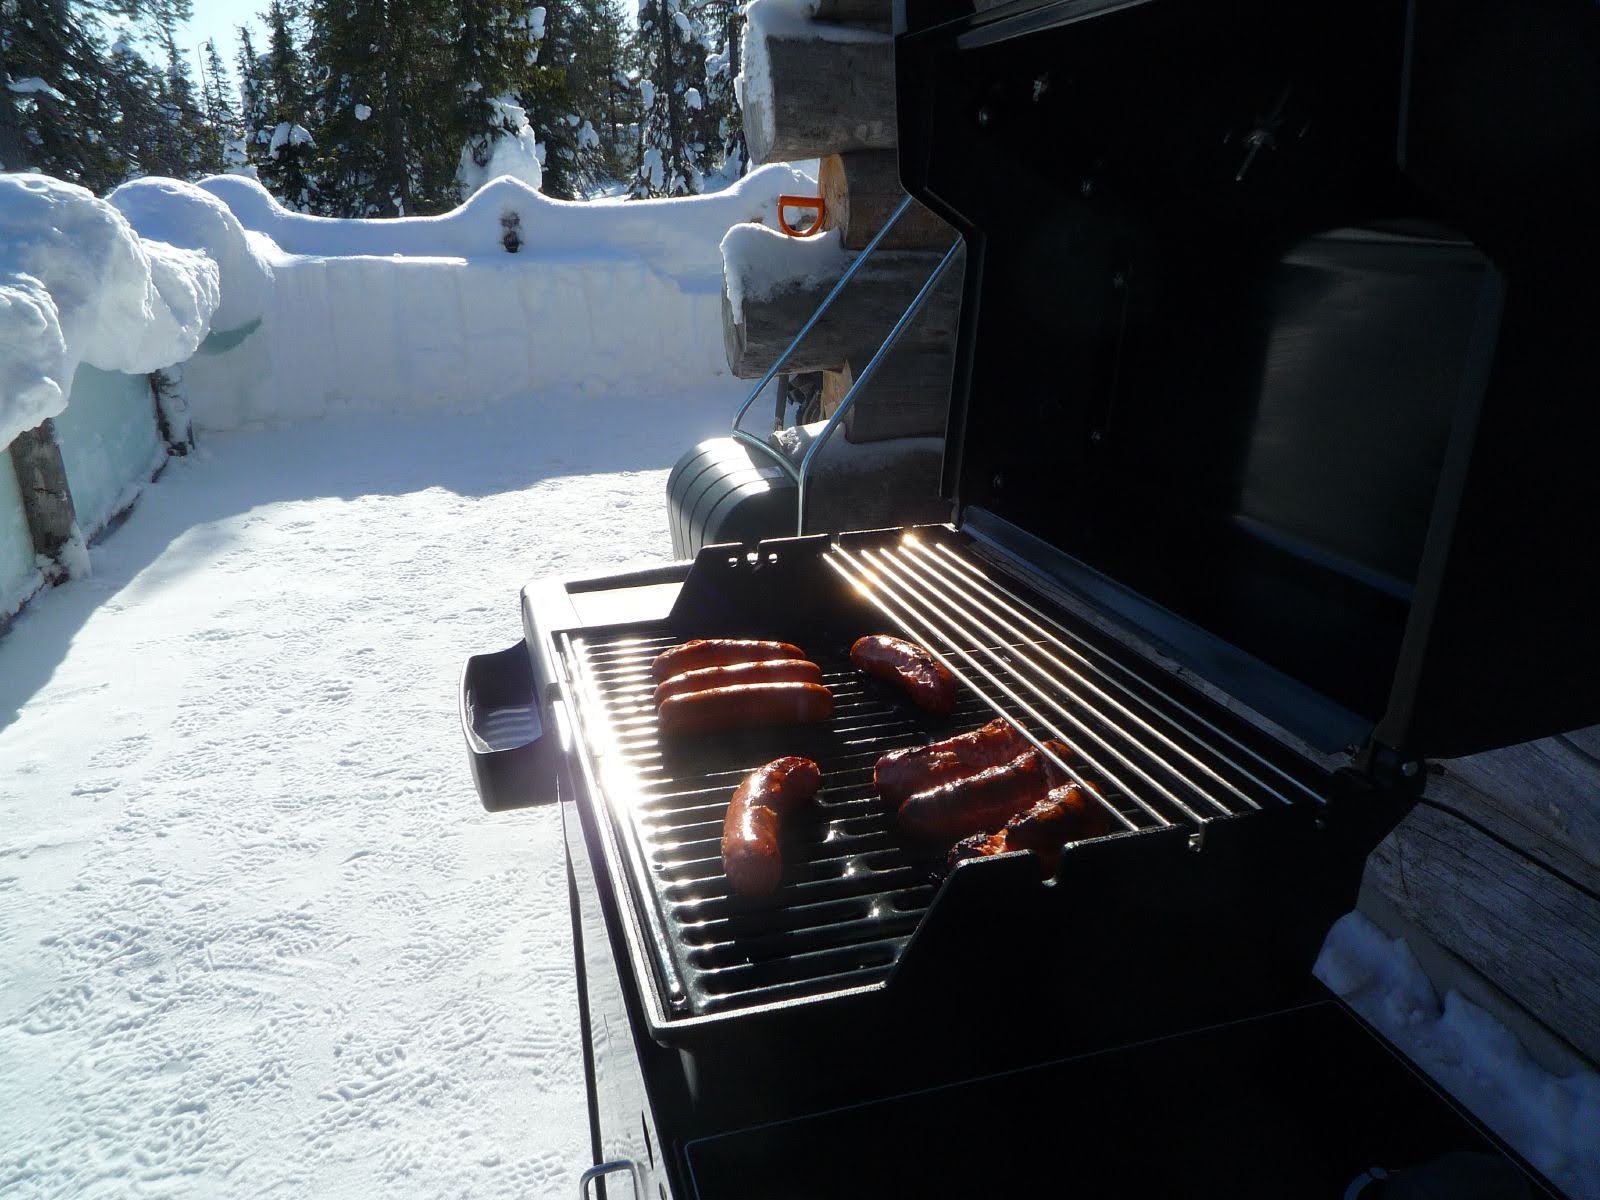 Winter BBQ Masterclass - Conquering the Grill in Cold Weather